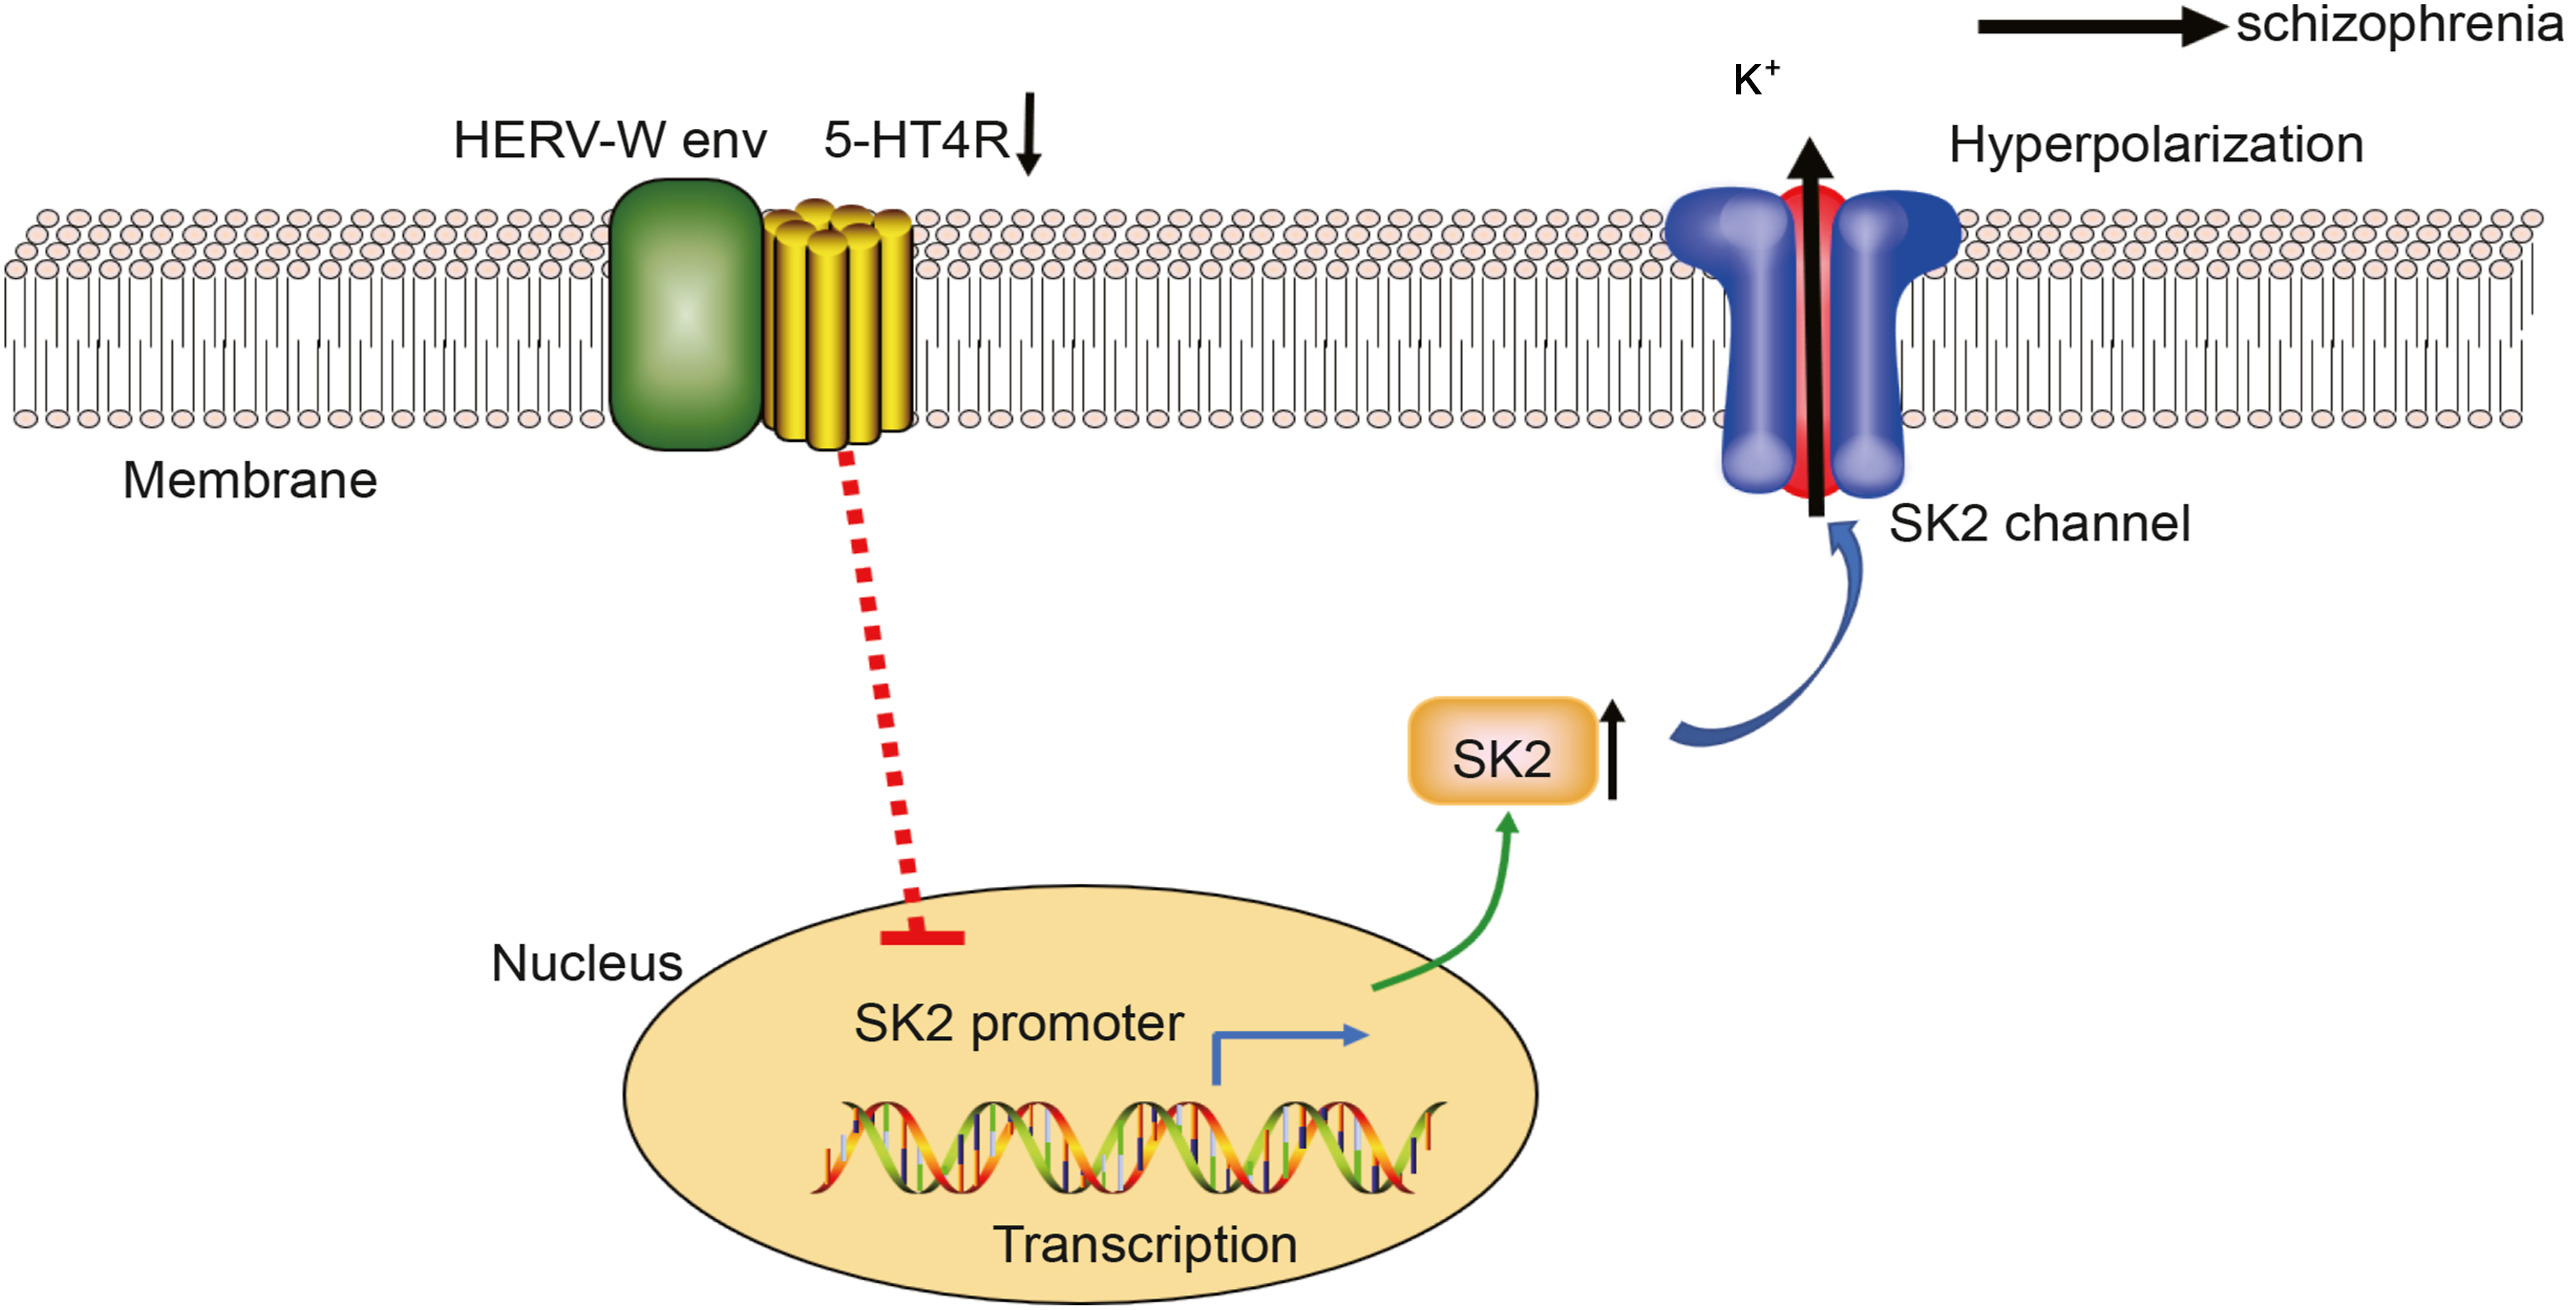 Domesticated HERV-W env contributes to the activation of the small conductance Ca<sup>2+</sup>-activated K<sup>+</sup> type 2 channels via decreased 5-HT4 receptor in recent-onset schizophrenia